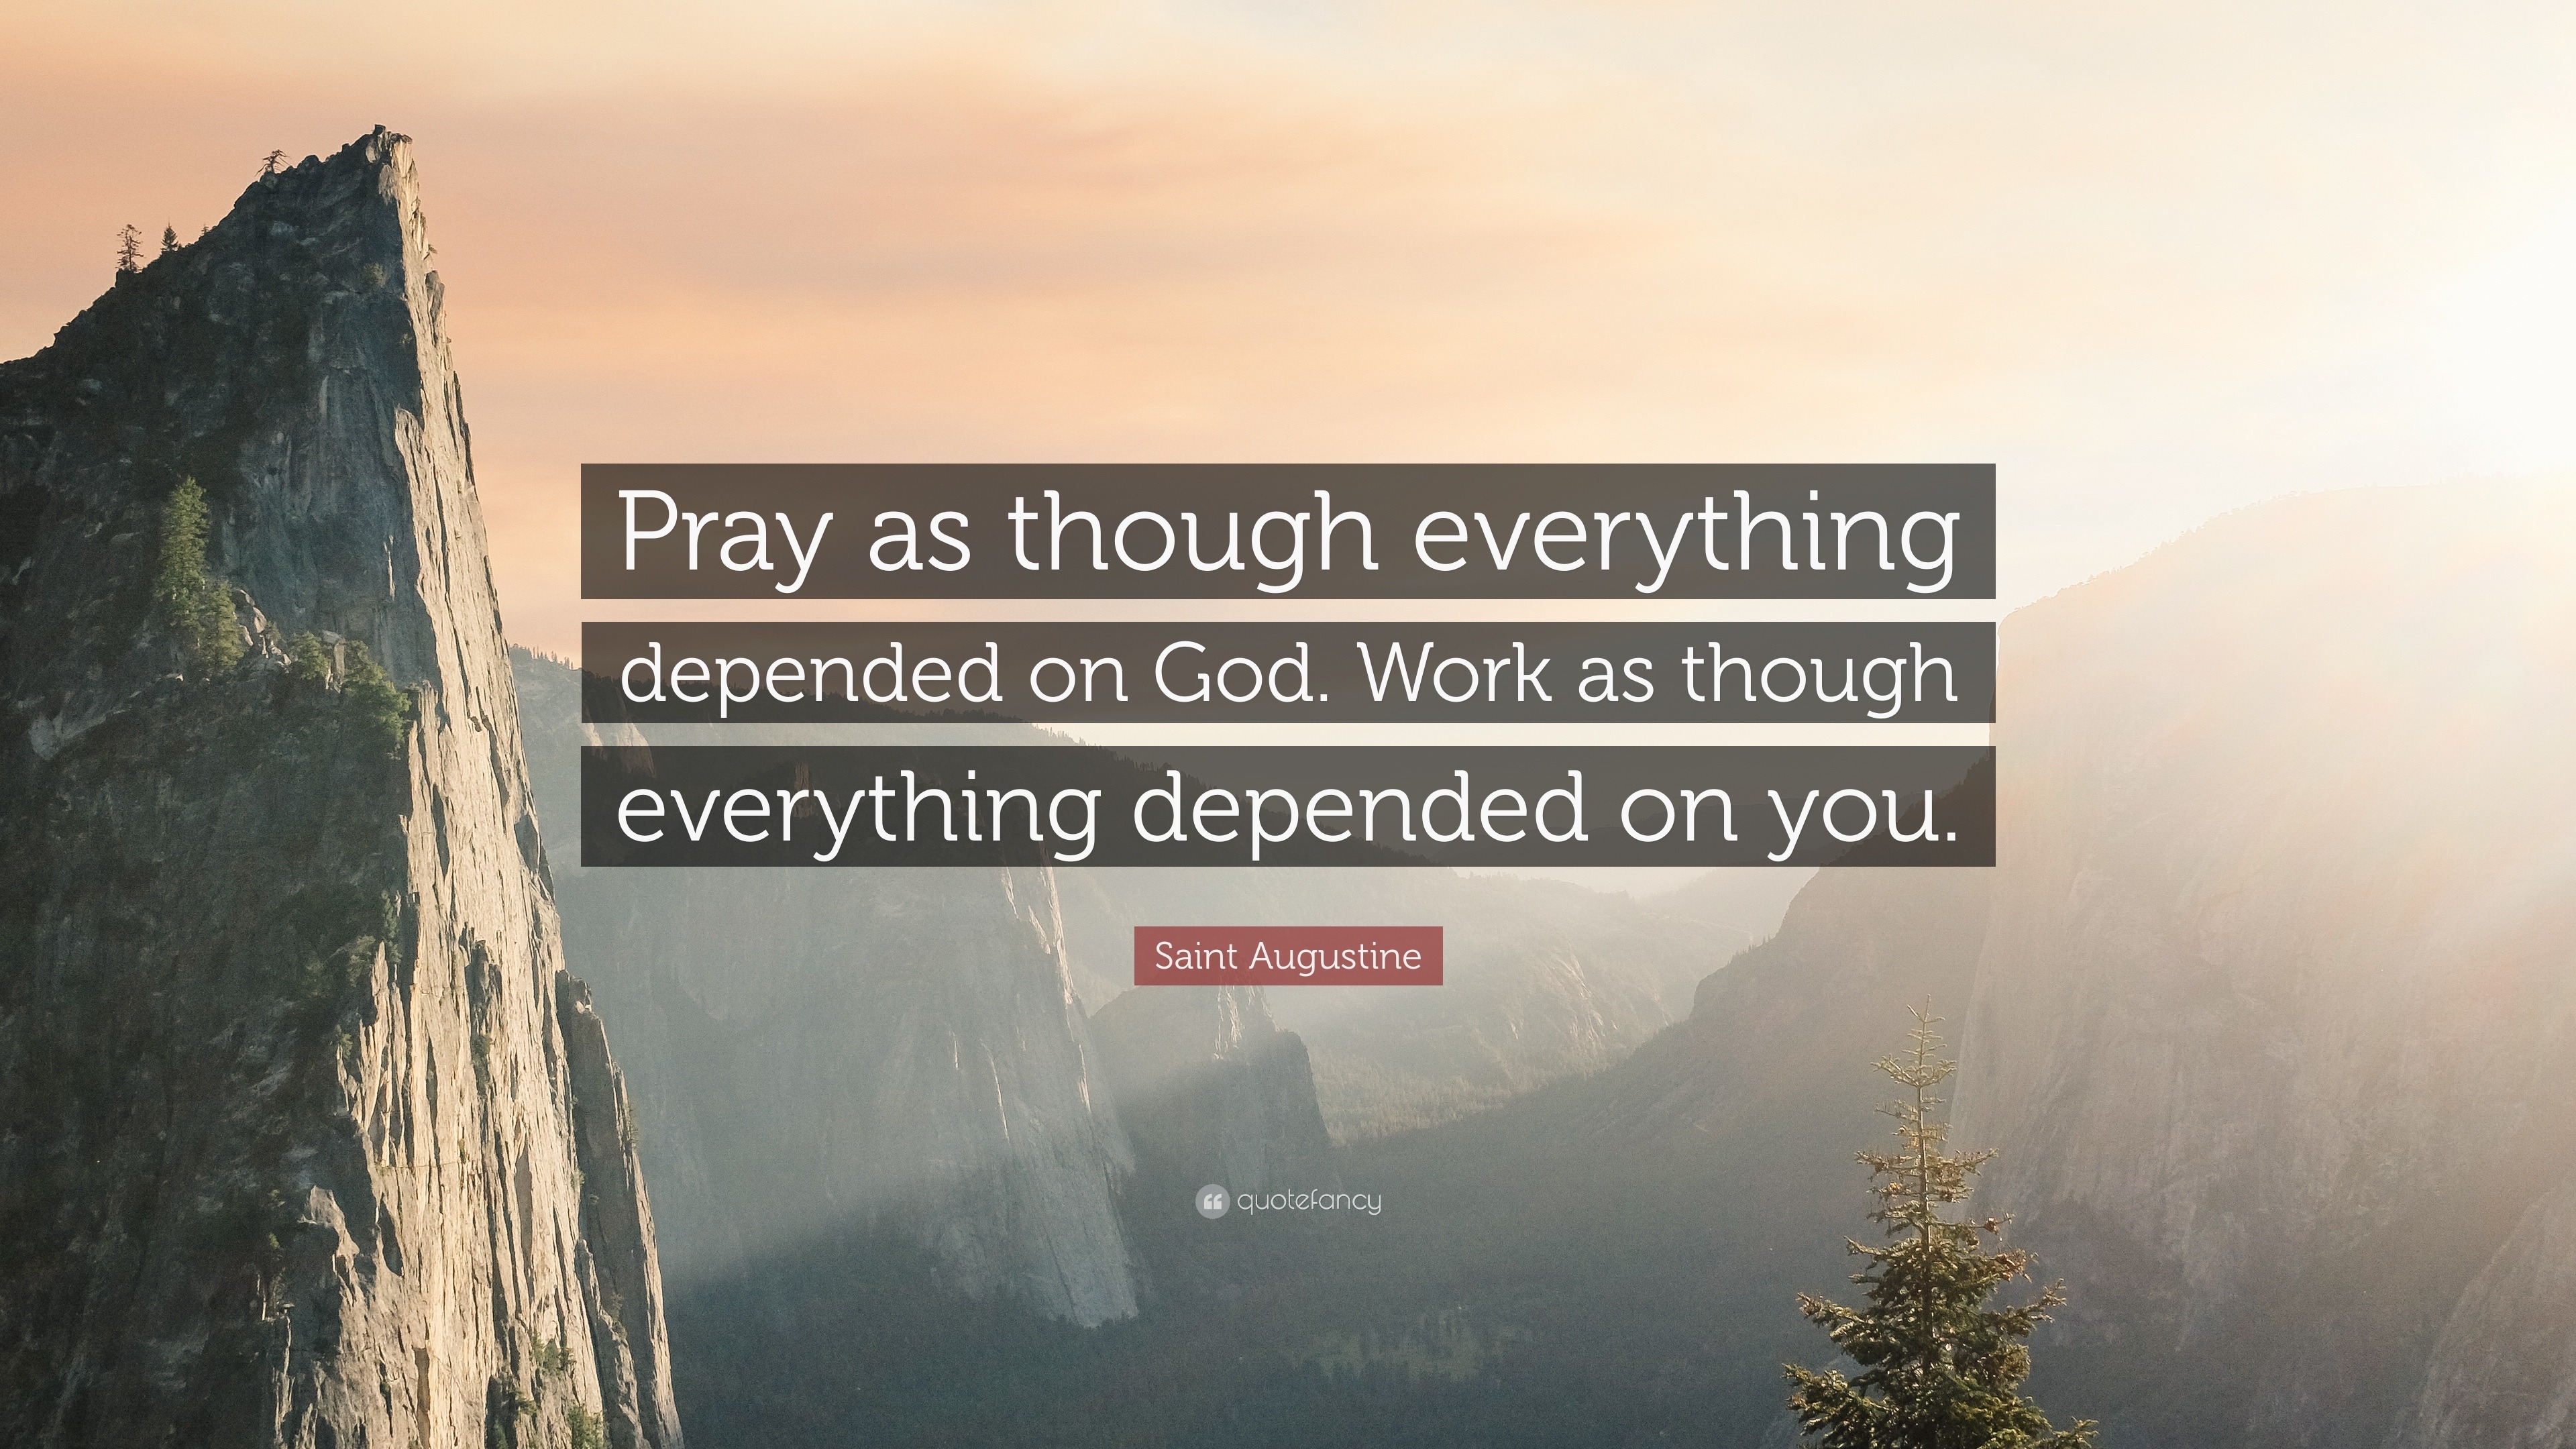 Saint Augustine Quote Pray As Though Everything Depended On God Work As Though Everything Depended On